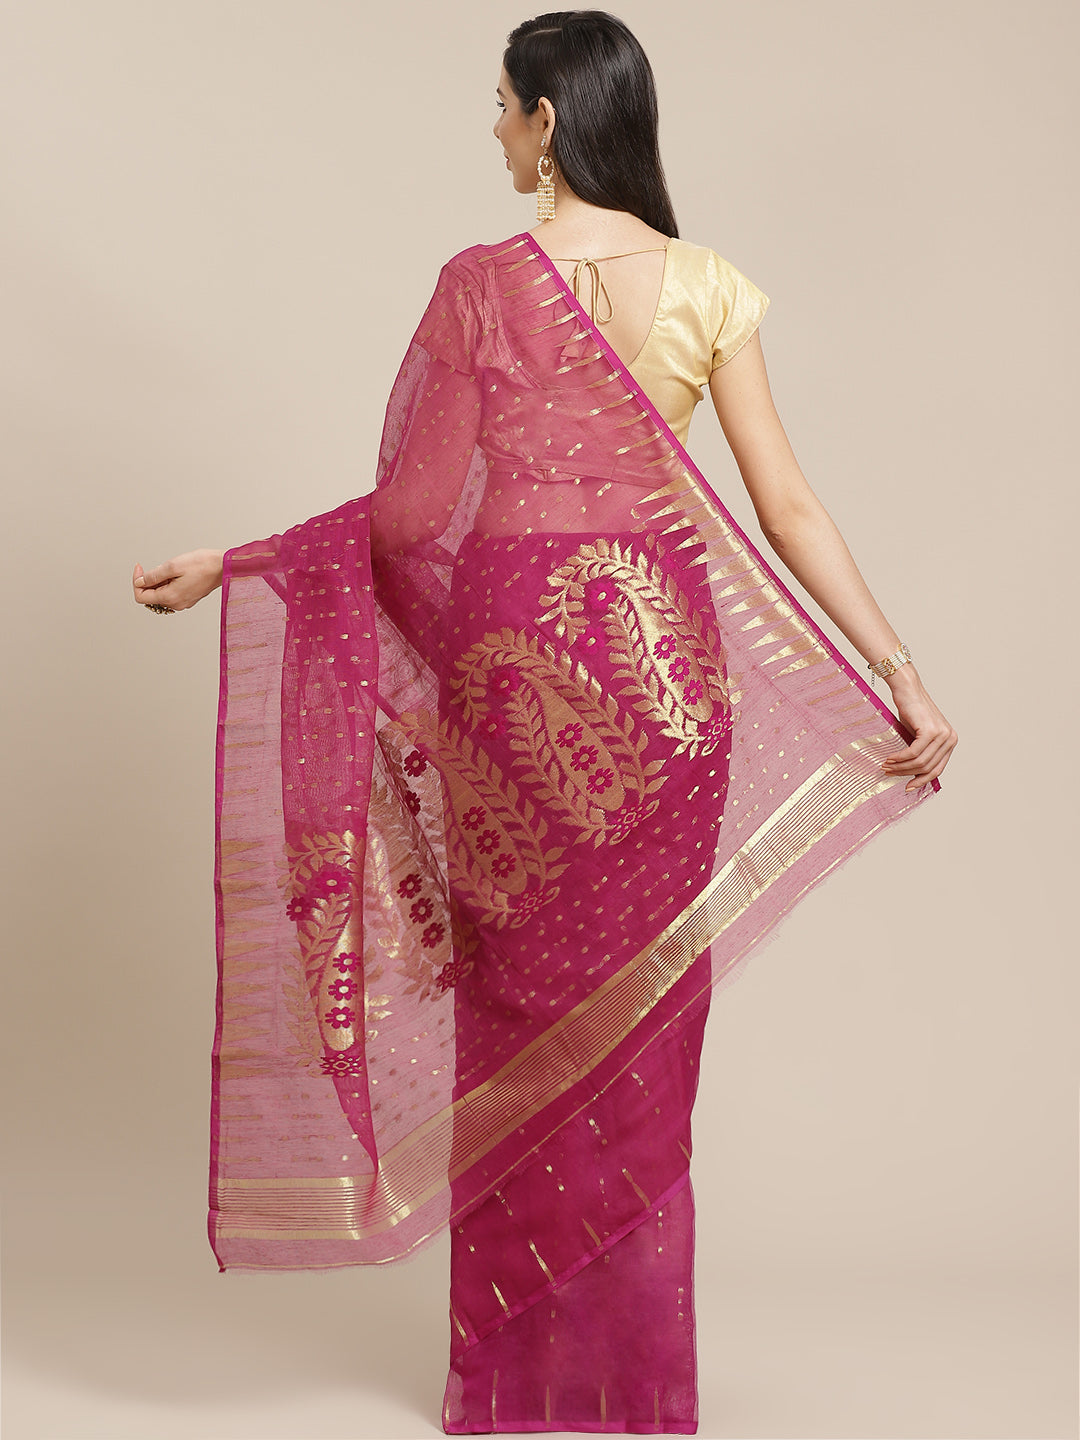 Purple and Gold, Kalakari India Jamdani Silk Cotton Woven Design Saree without blouse CHBHSA0039-Saree-Kalakari India-CHBHSA0039-Bengal, Geographical Indication, Hand Crafted, Hand Painted, Heritage Prints, Jamdani, Natural Dyes, Red, Sarees, Silk Blended, Sustainable Fabrics, Woven, Yellow-[Linen,Ethnic,wear,Fashionista,Handloom,Handicraft,Indigo,blockprint,block,print,Cotton,Chanderi,Blue, latest,classy,party,bollywood,trendy,summer,style,traditional,formal,elegant,unique,style,hand,block,prin